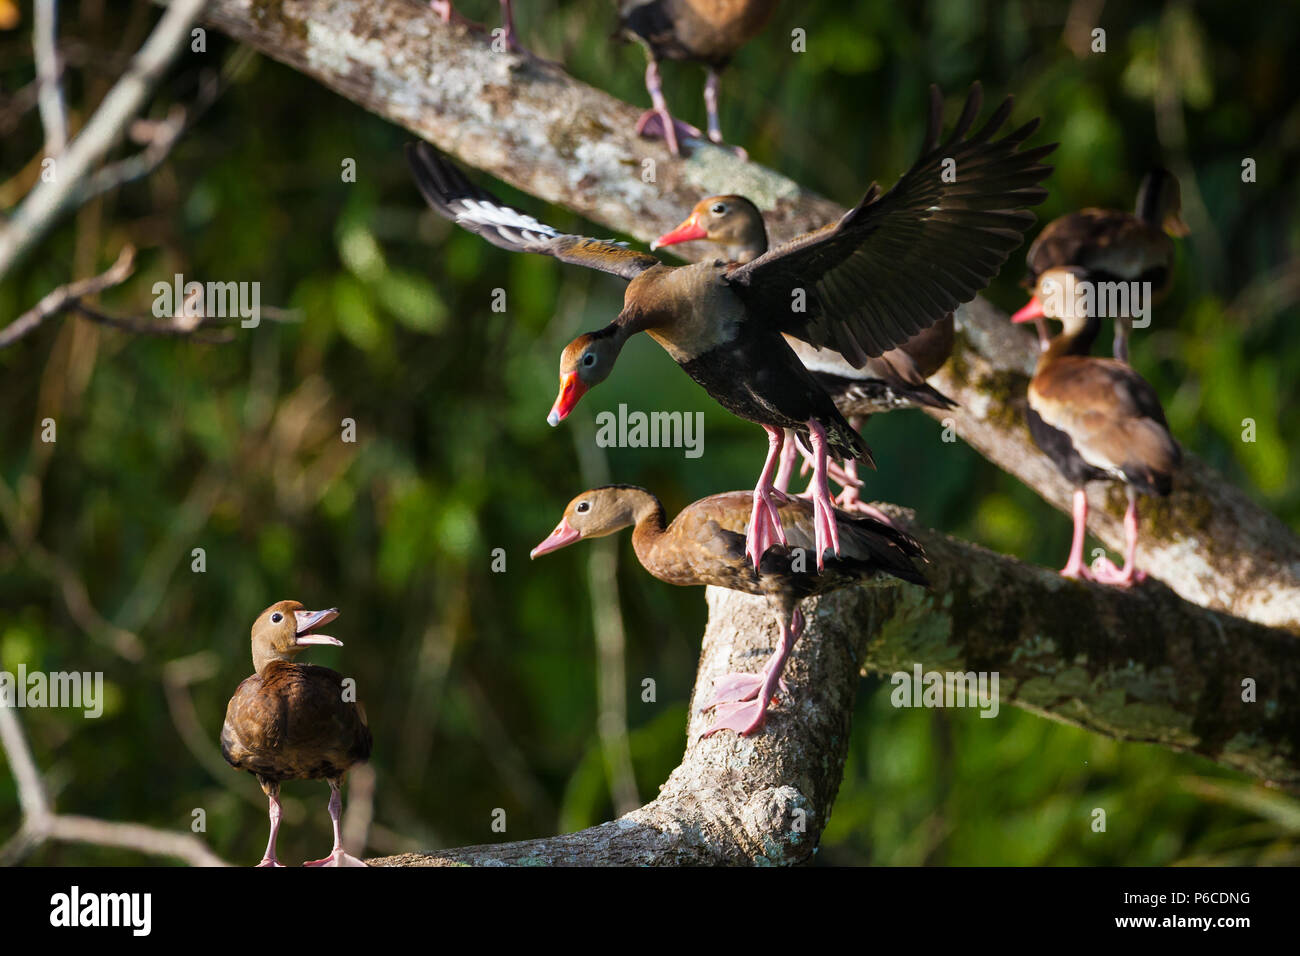 Black-bellied Whistling-ducks, Dendrocygna autumnalis, in a tree at the riverside of Rio Chagres, Soberania national park, Republic of Panama. Stock Photo